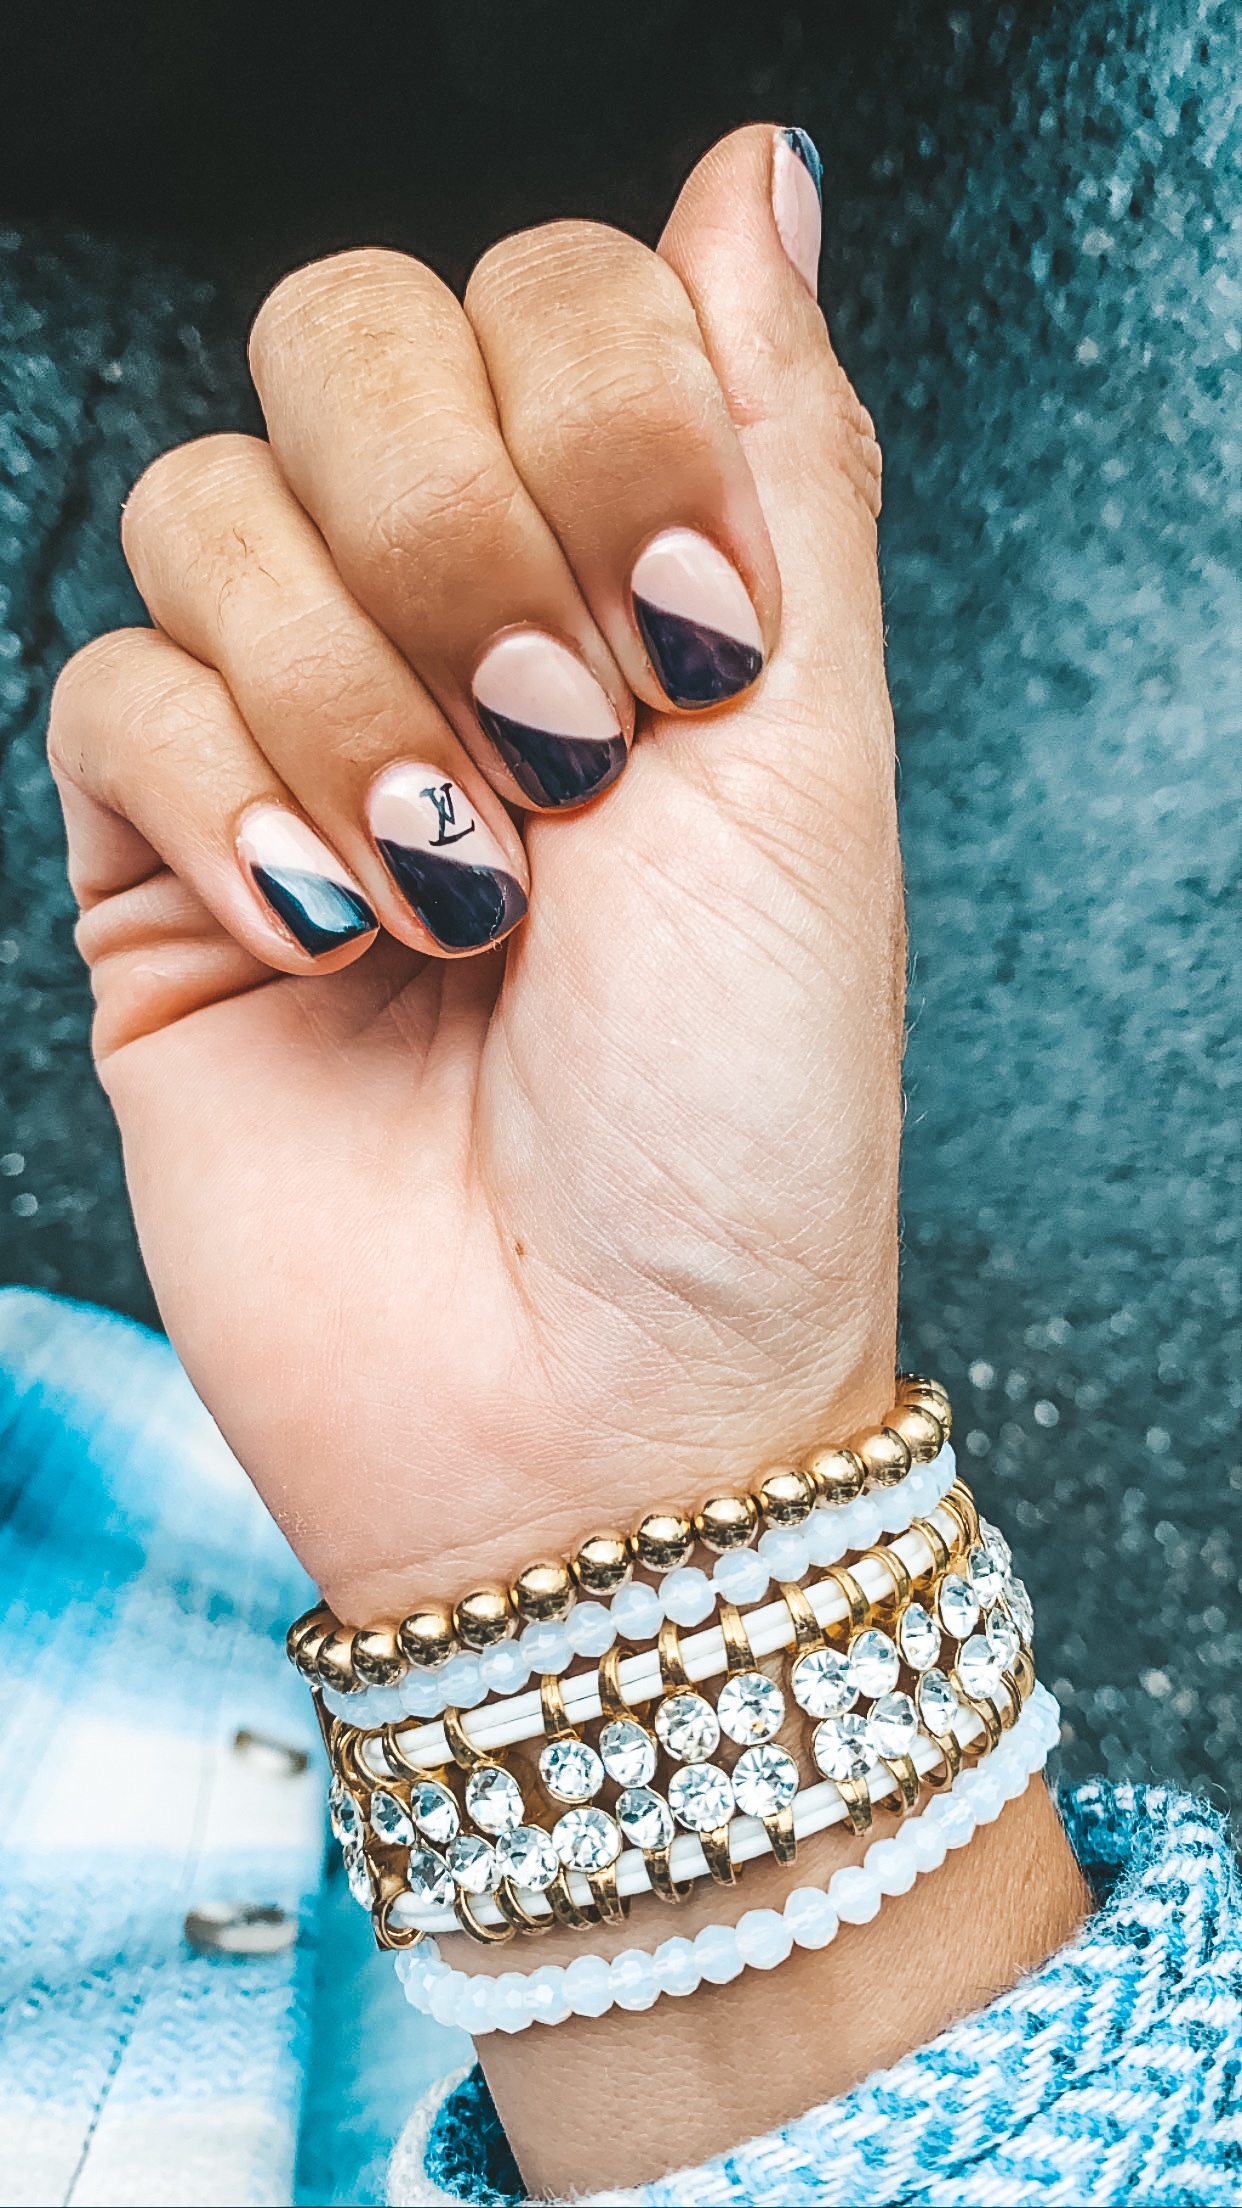 Louis Vuitton LV inspired neutral manicure best nails for fall by angela lanter beauty blogger 2022